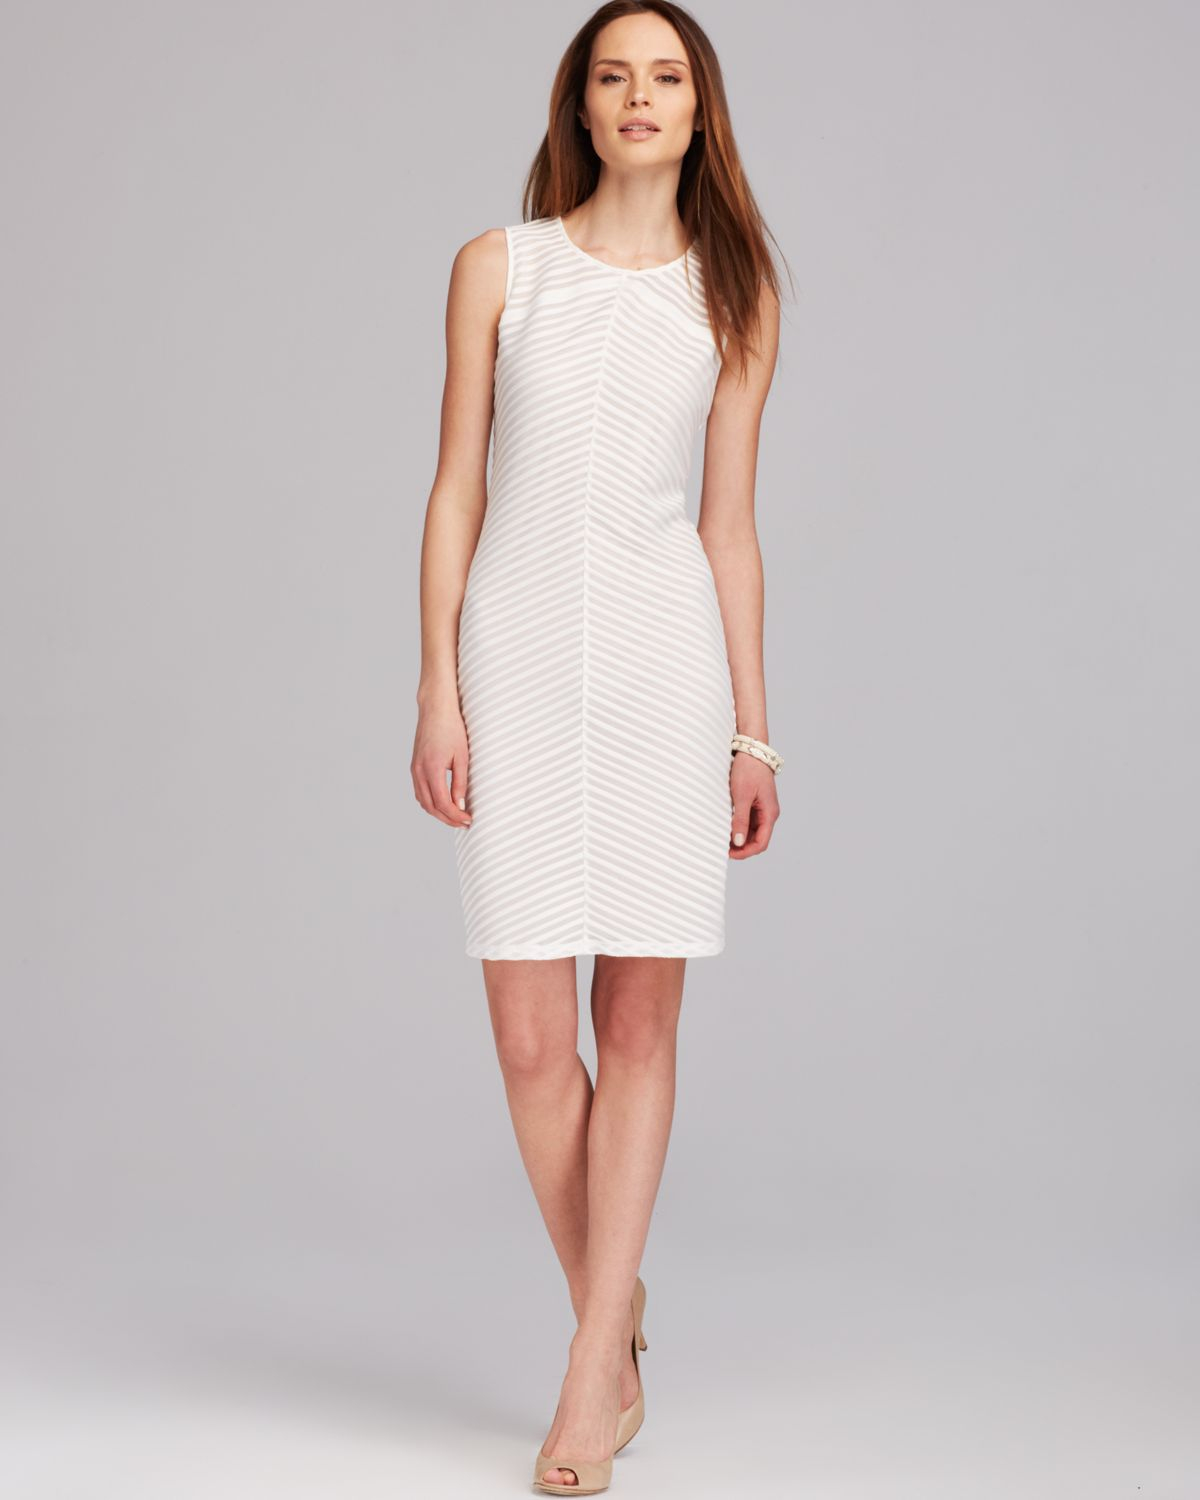 Calvin Klein Cocktail Party Dresses Norway, SAVE 47% -  